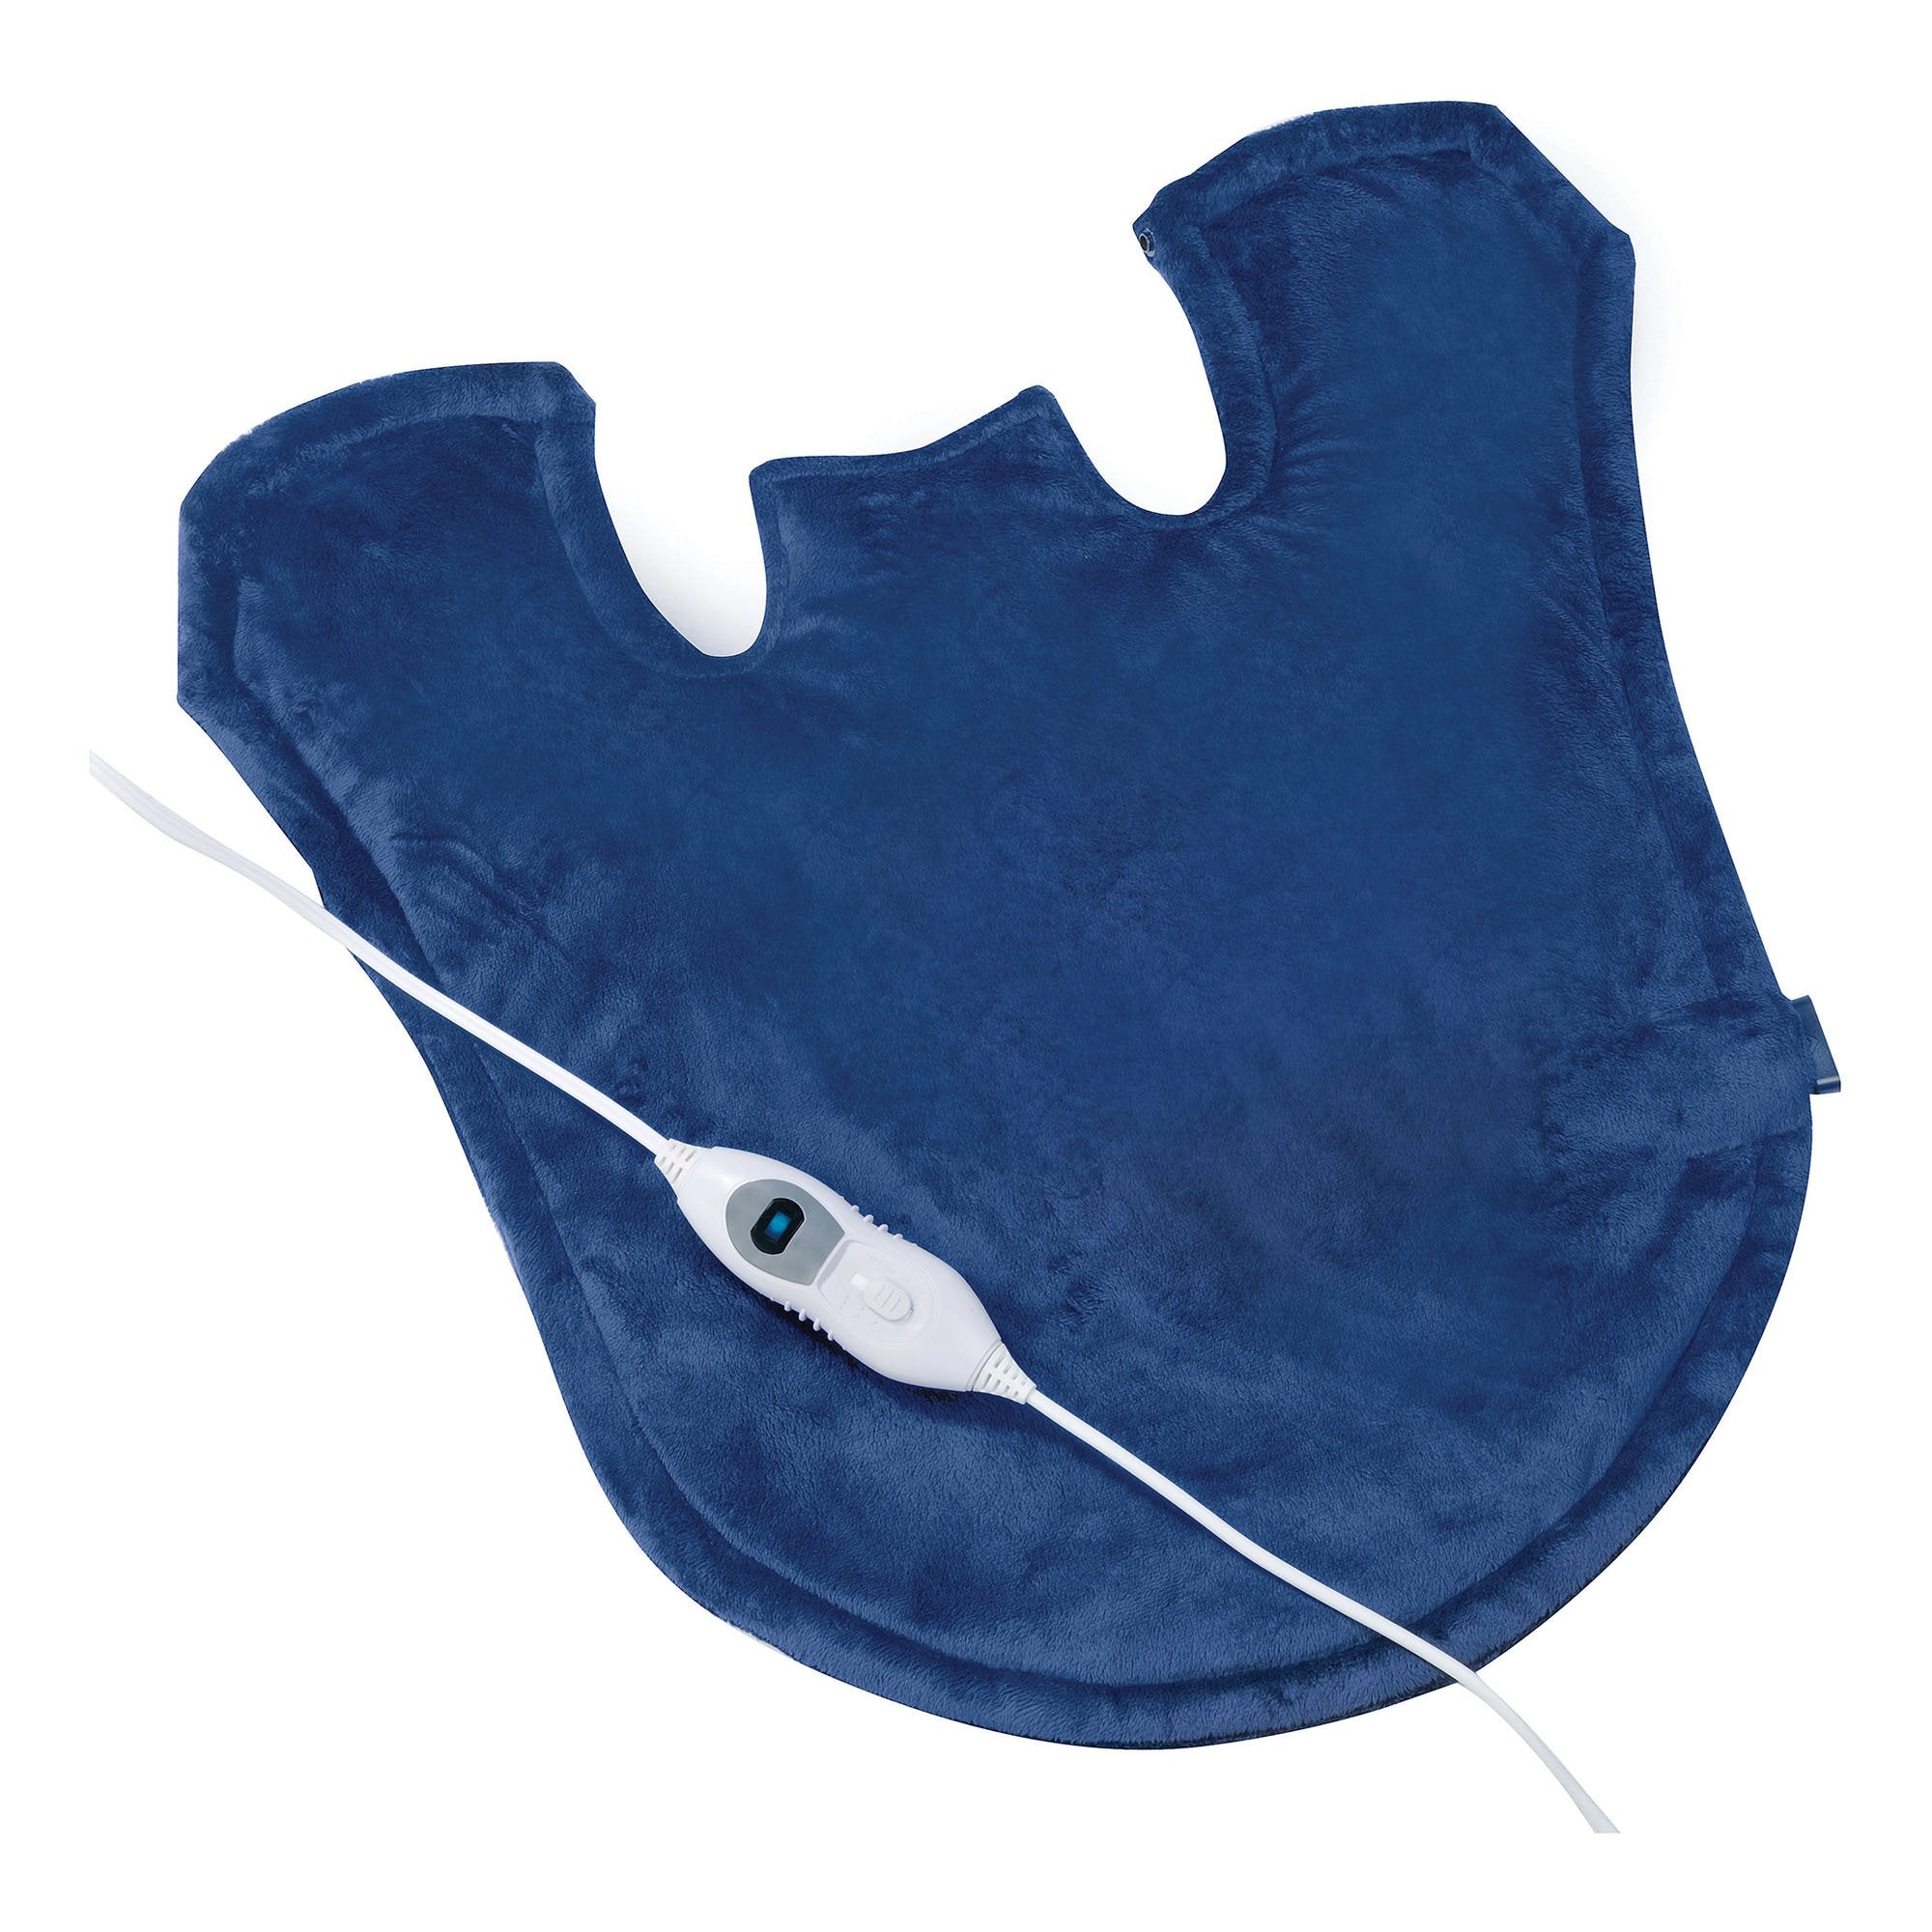 Heating Pad Thera Care Back / Neck / Shoulder One Size Fits Most Micro-Plush Fabric Reusable